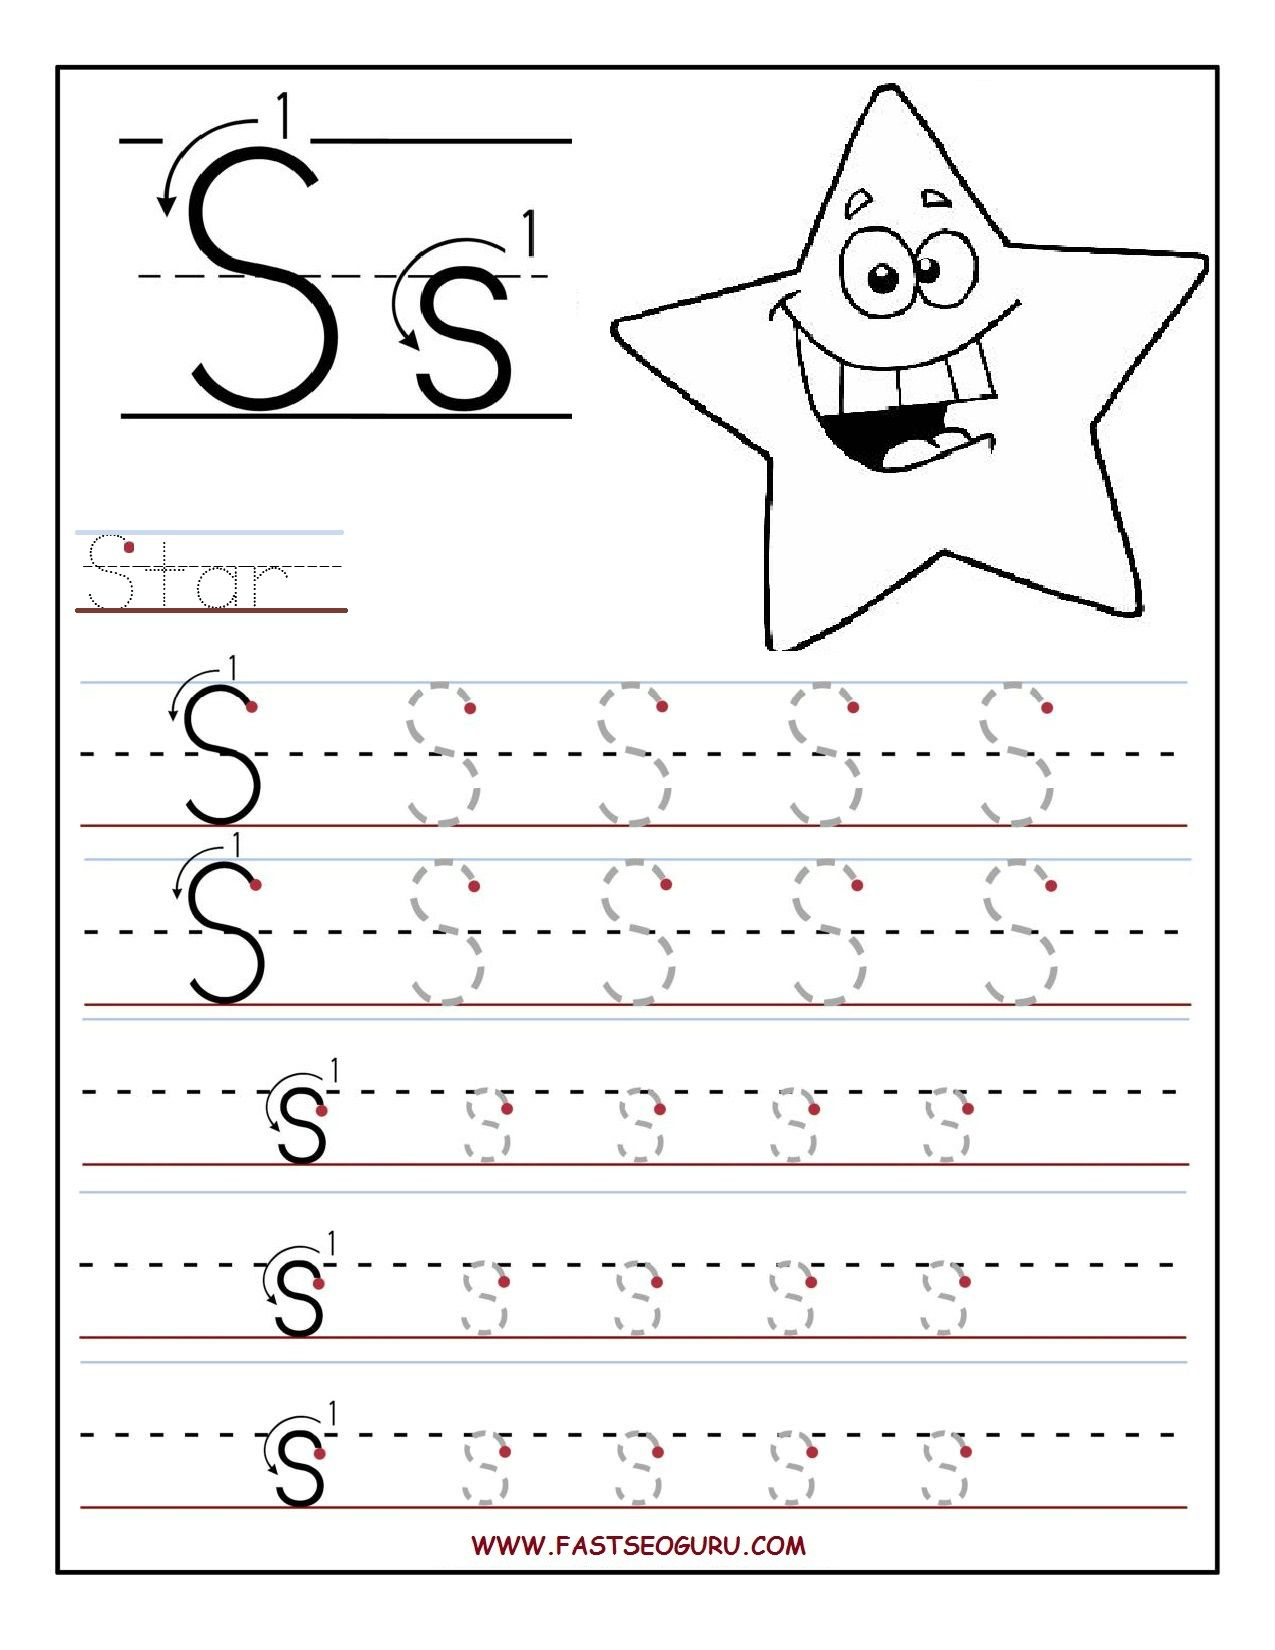 Printable Cursive Alphabet Worksheets Abitlikethis with Pre-K Tracing Letters Worksheets